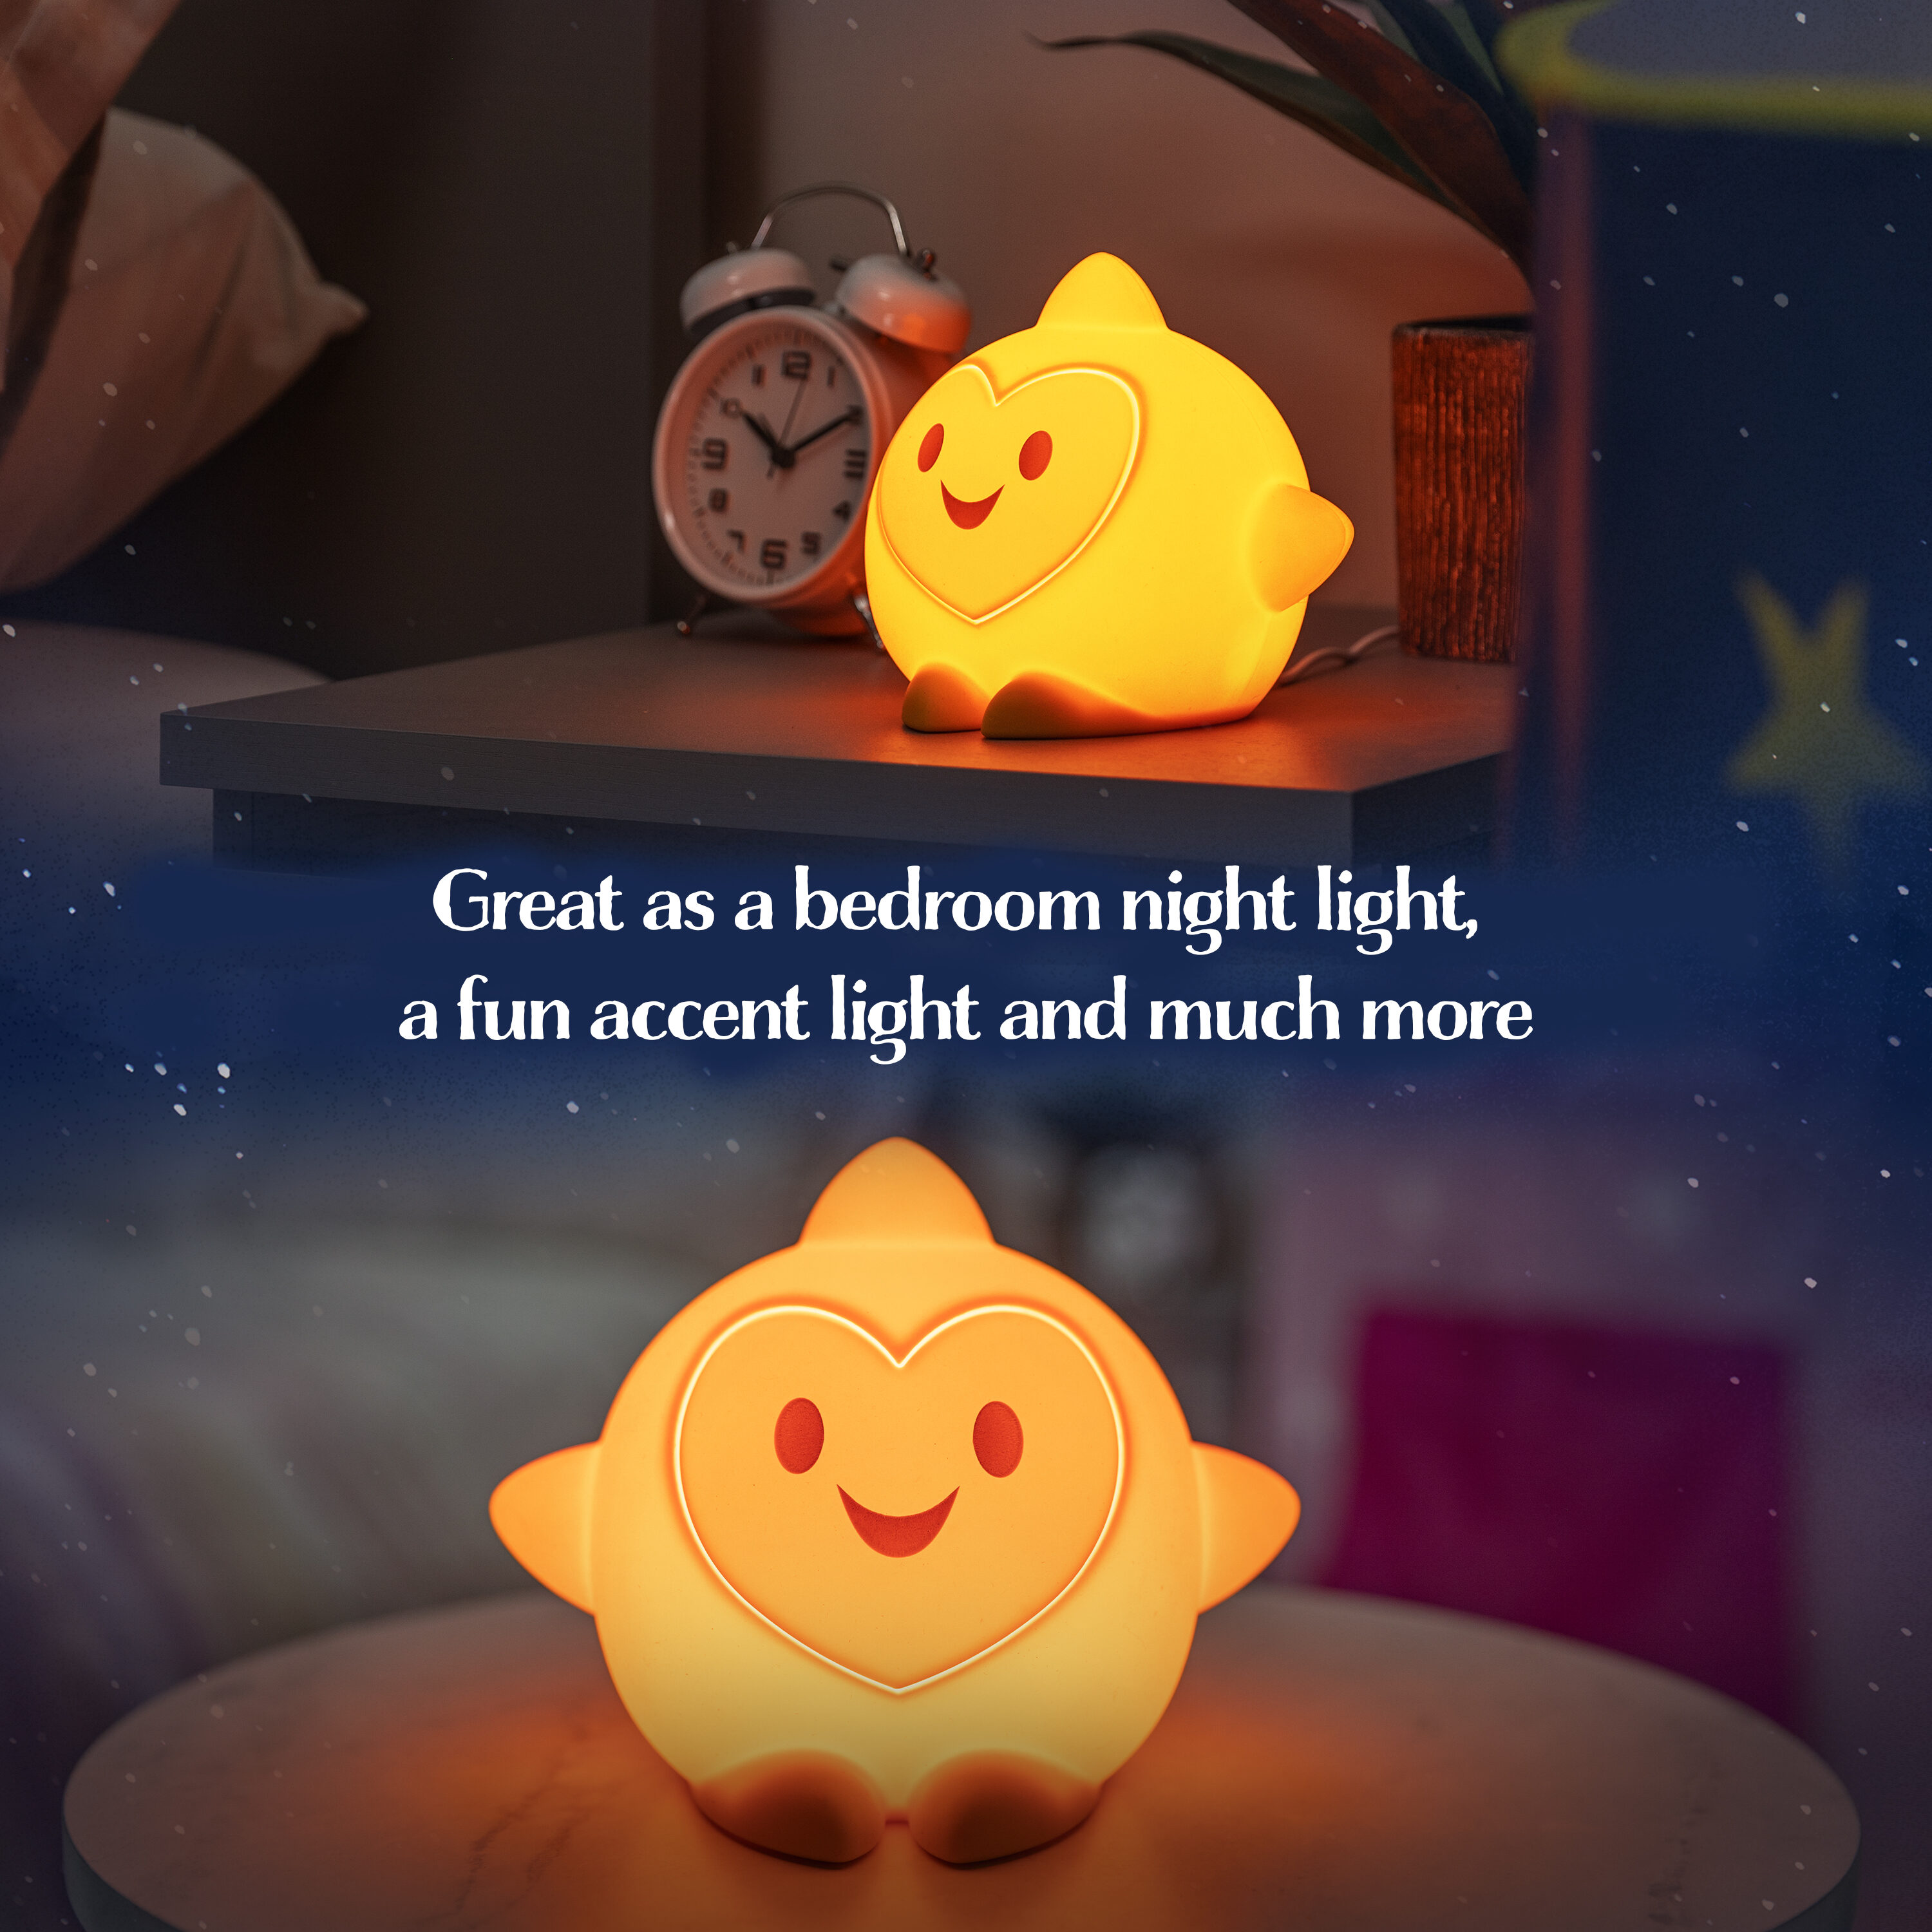  Disney Wish Hug & Wish Star 10-Inch Glowing Plush Star,  Soothing Night Light, Officially Licensed Kids Toys for Ages 3 Up by Just  Play : Toys & Games